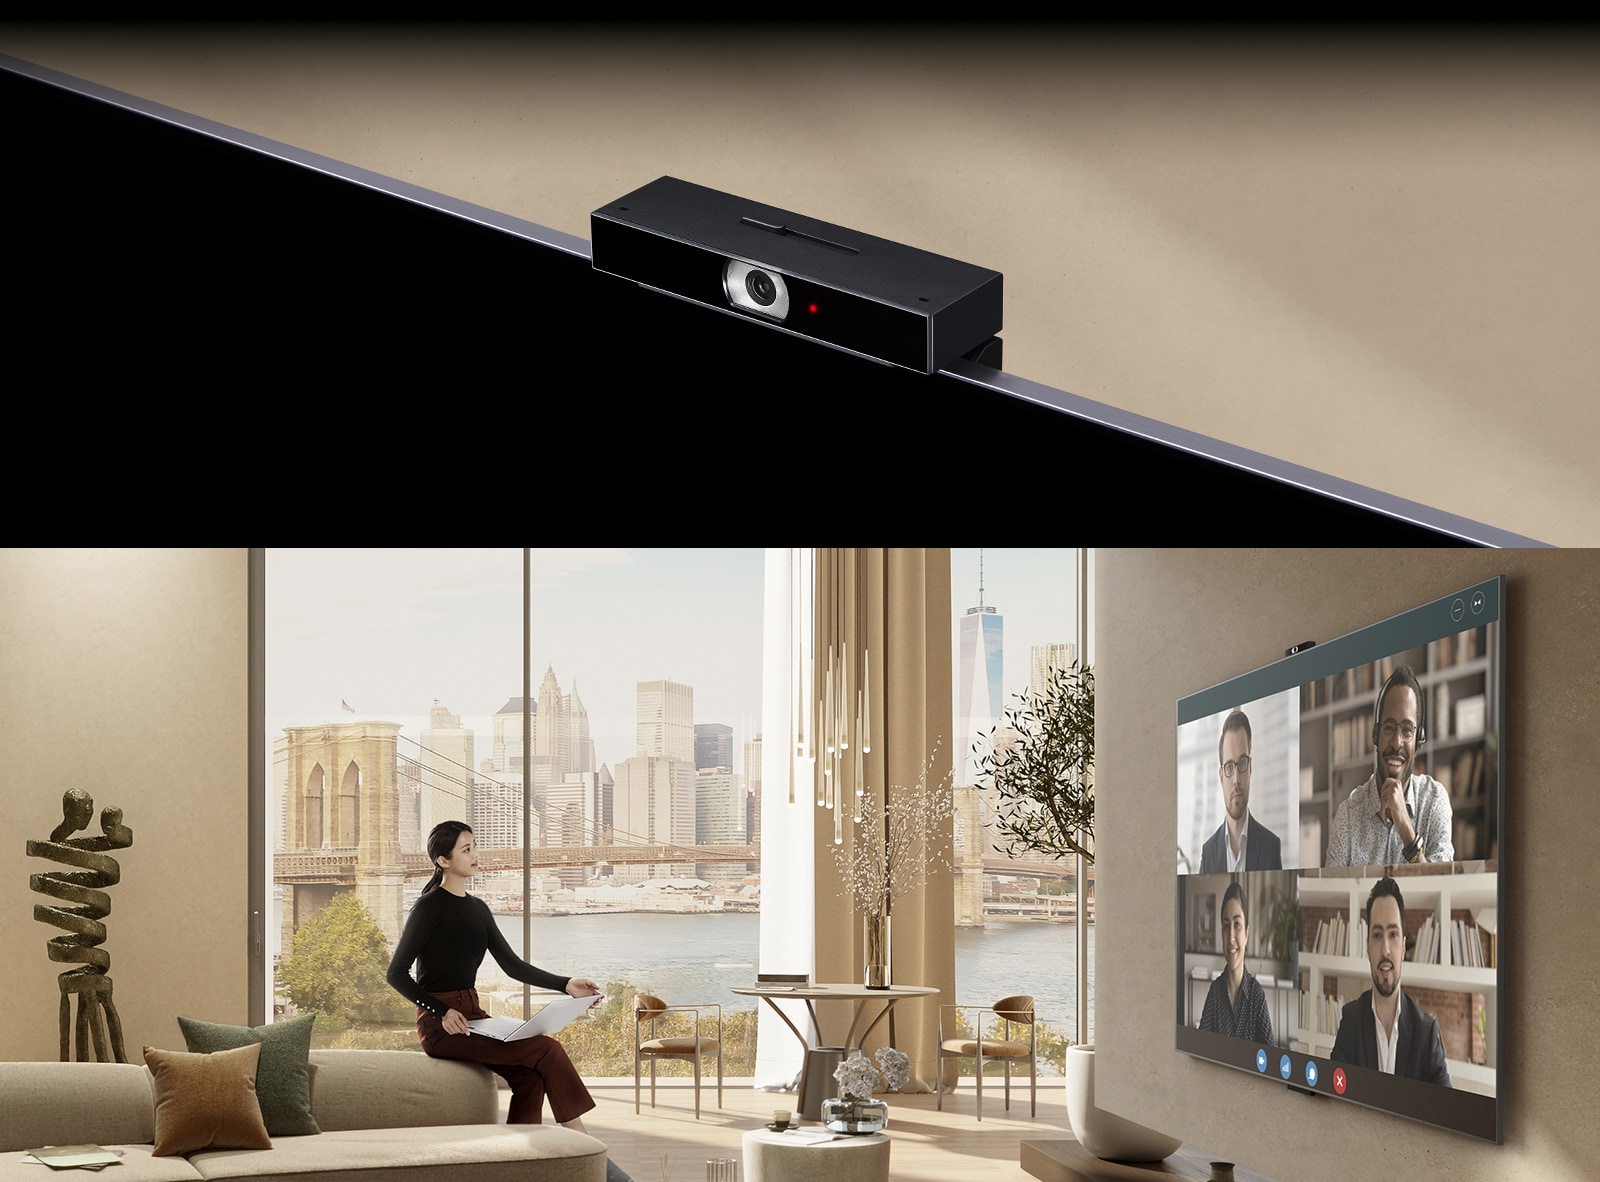 The first image depicts a close-up view of an LG Smart Cam installed on a LG 65QNED756RB TV in a beige-colored space. In the second image, a woman is seen sitting on the armrest of a sofa while holding a laptop and watching TV. On the large screen of the TV, there are four characters and a video conference visible.